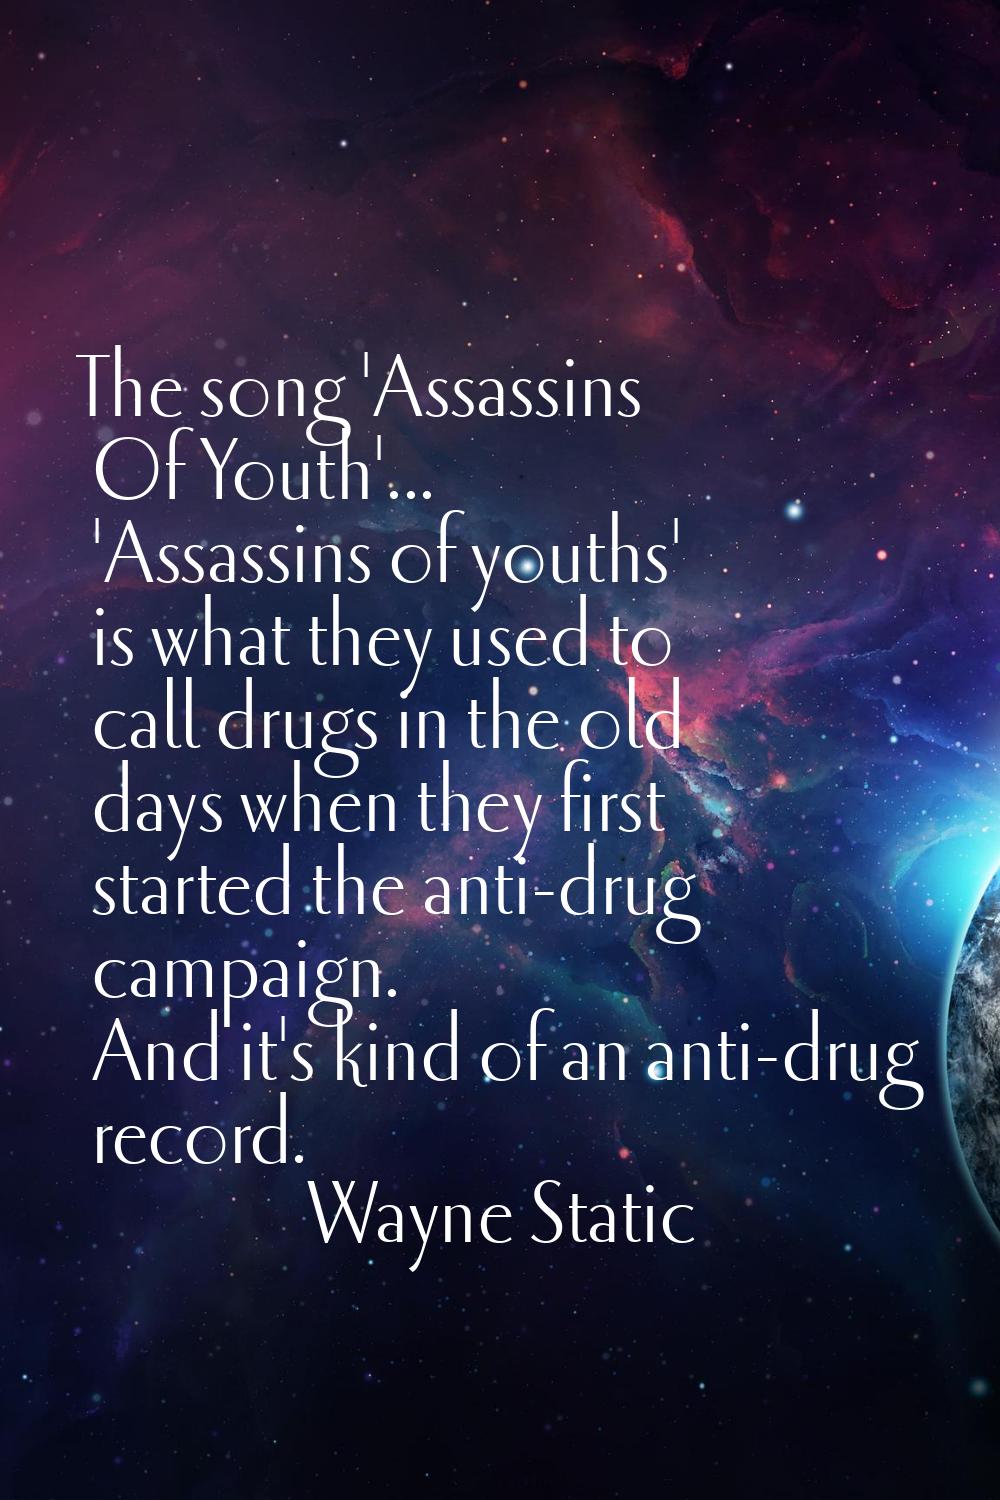 The song 'Assassins Of Youth'... 'Assassins of youths' is what they used to call drugs in the old d